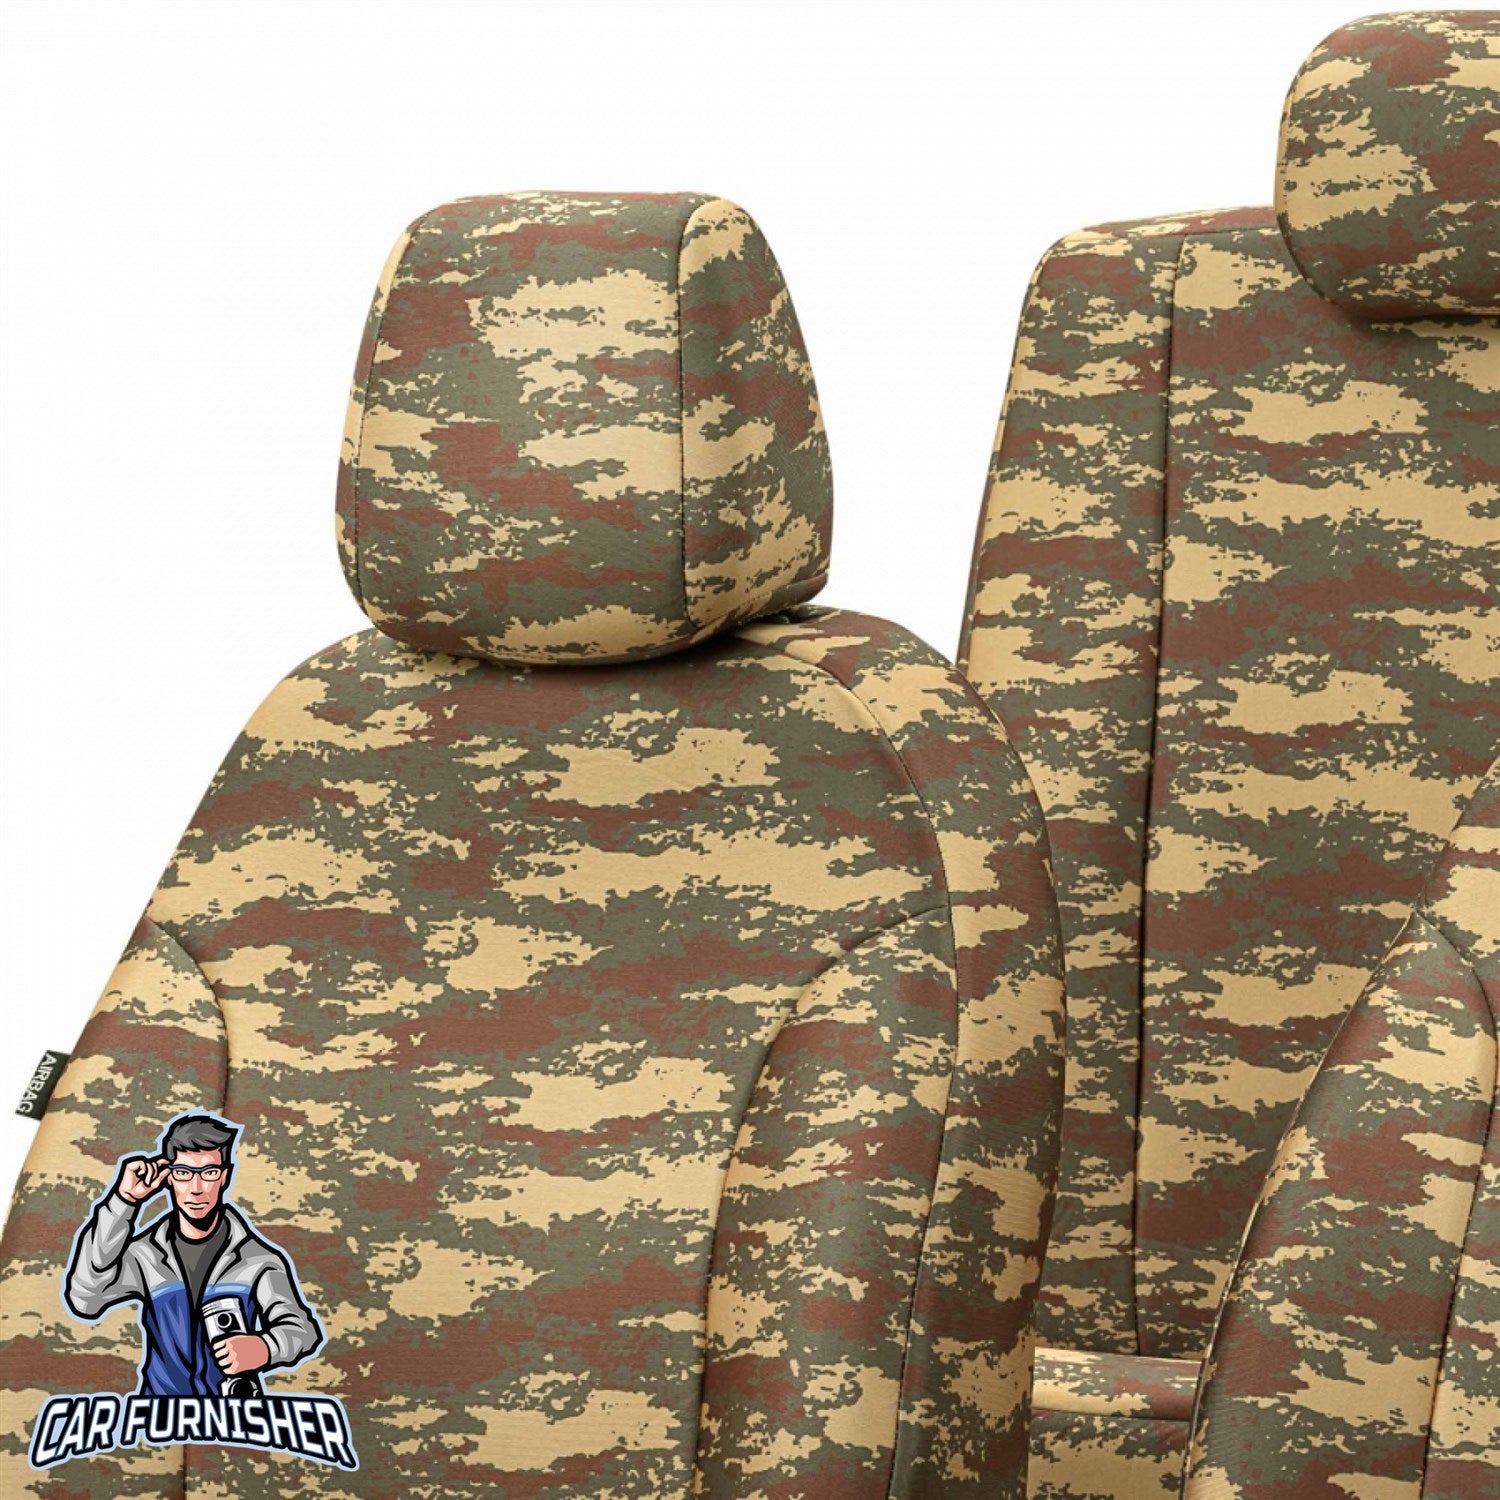 Ford Fusion Seat Covers Camouflage Waterproof Design Sierra Camo Waterproof Fabric